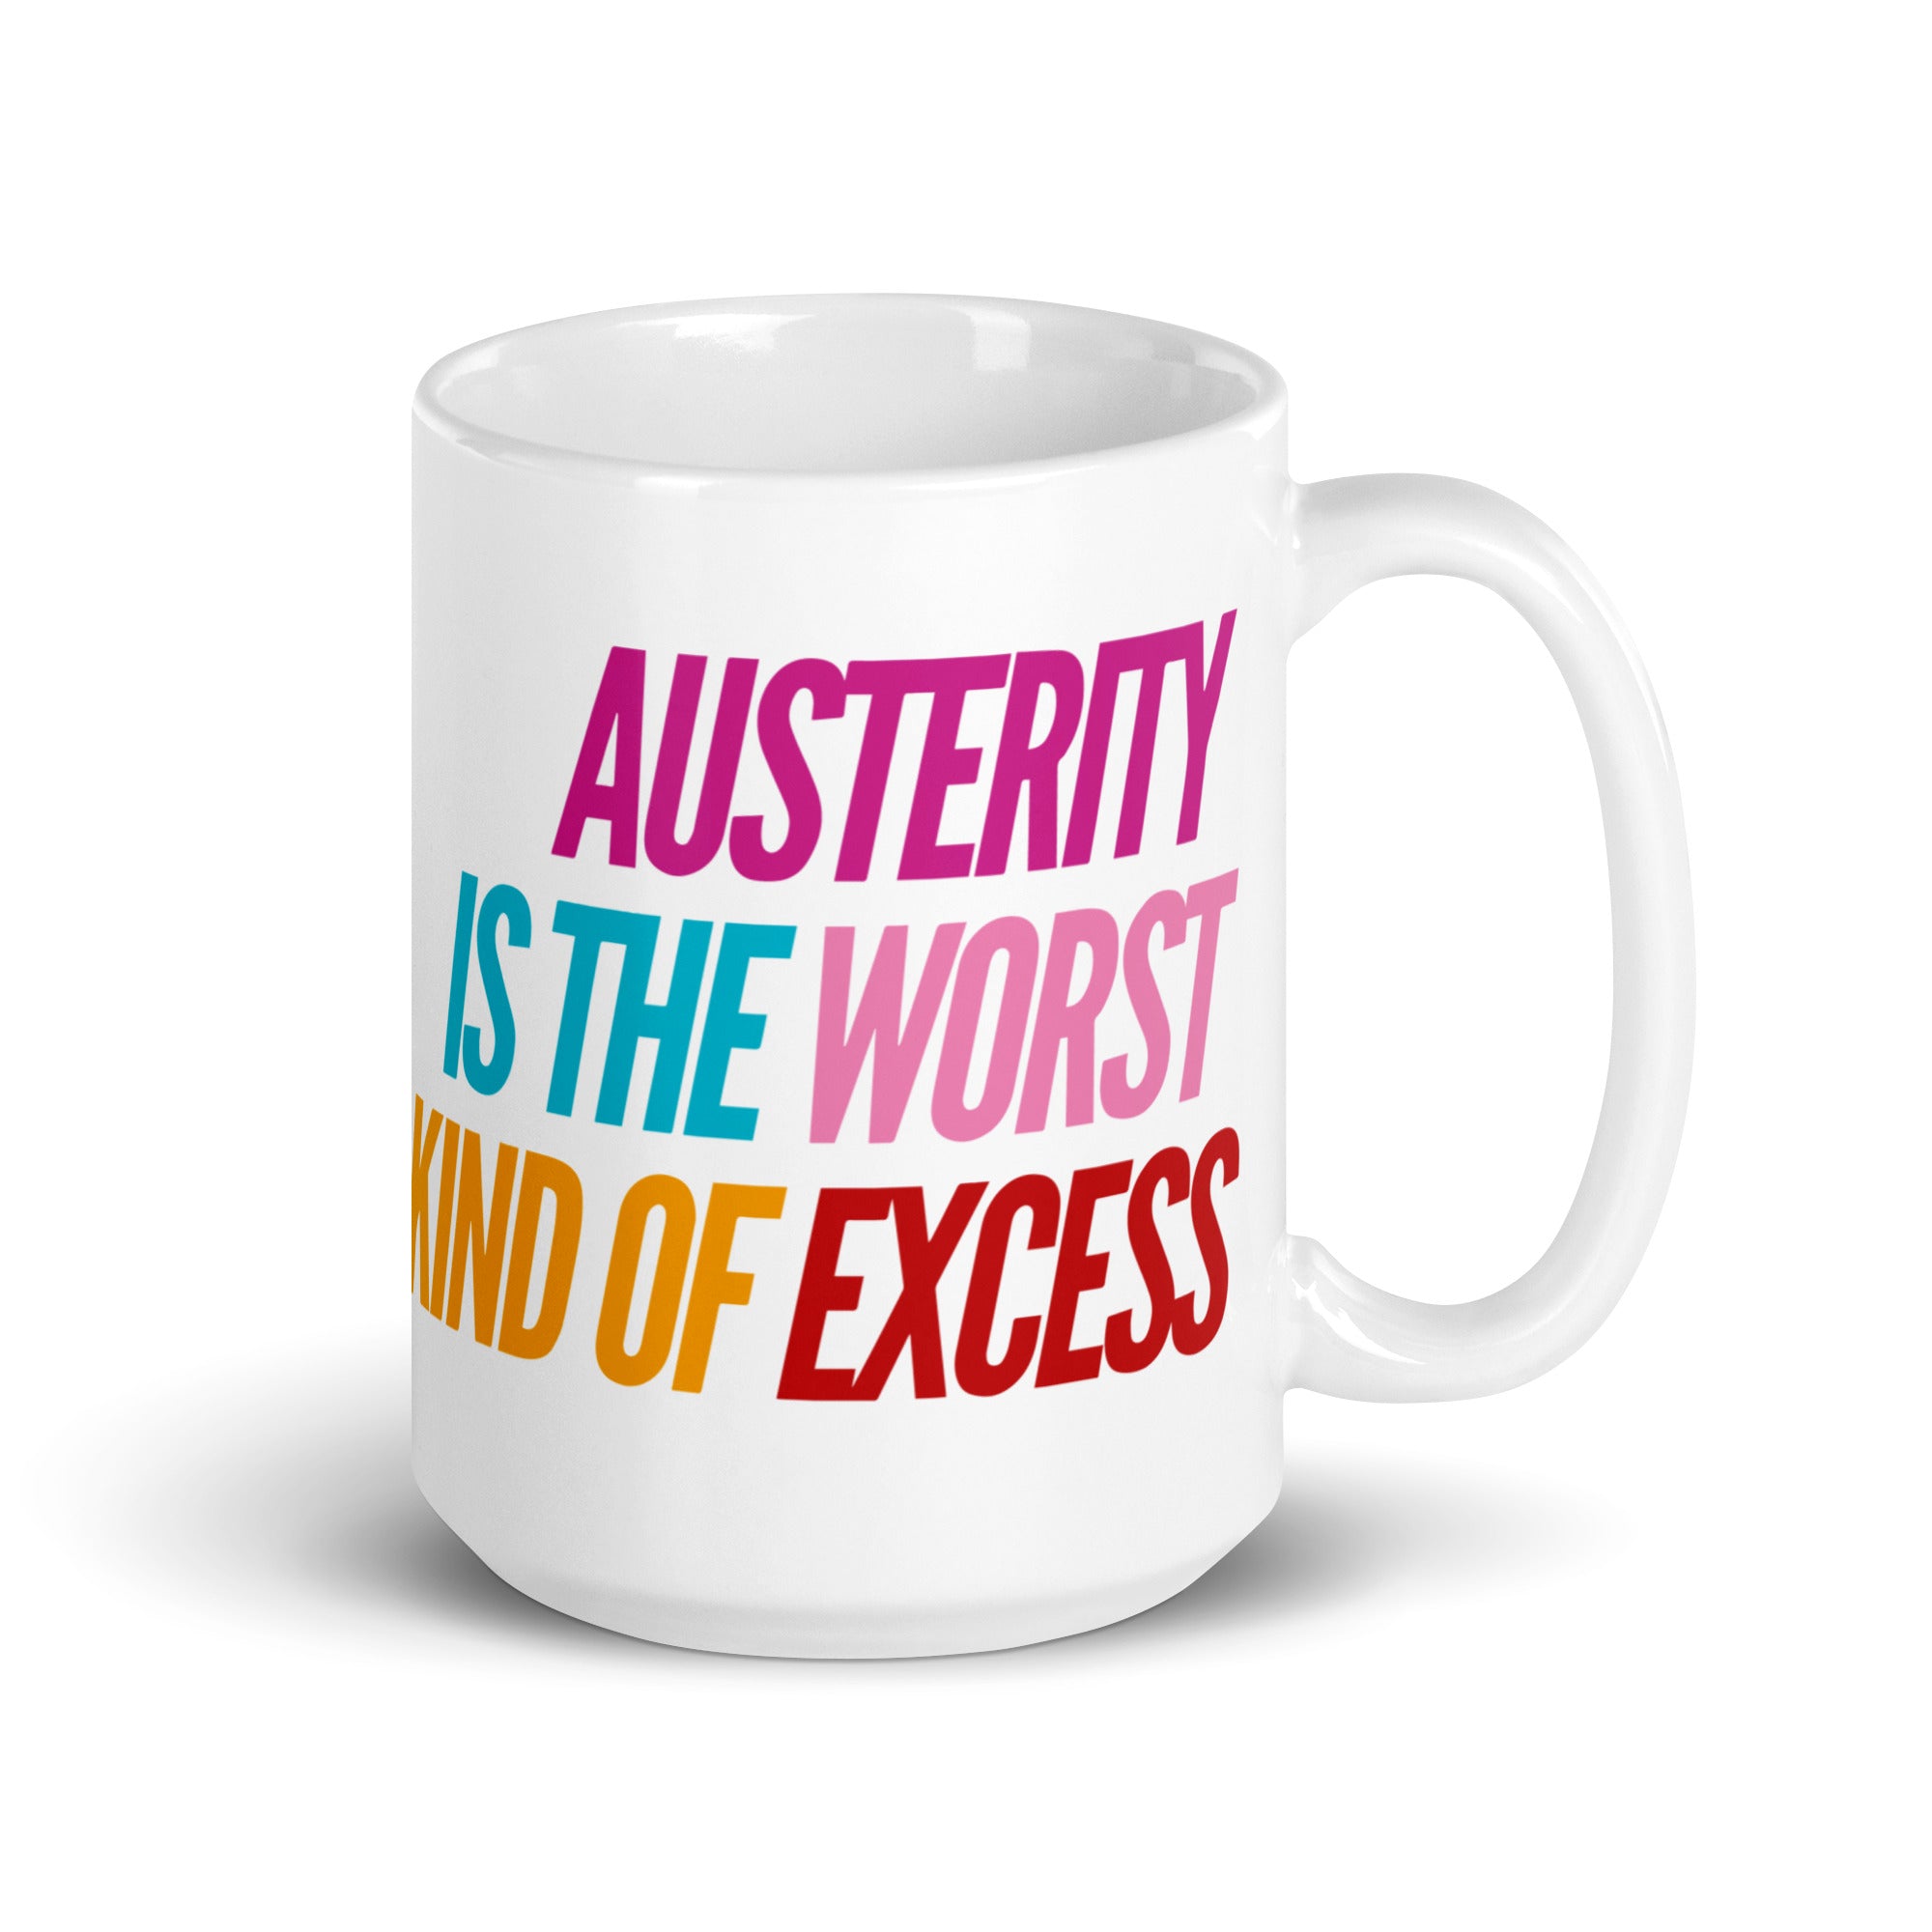 "Austerity is The Worst Kind of Excess" Mug